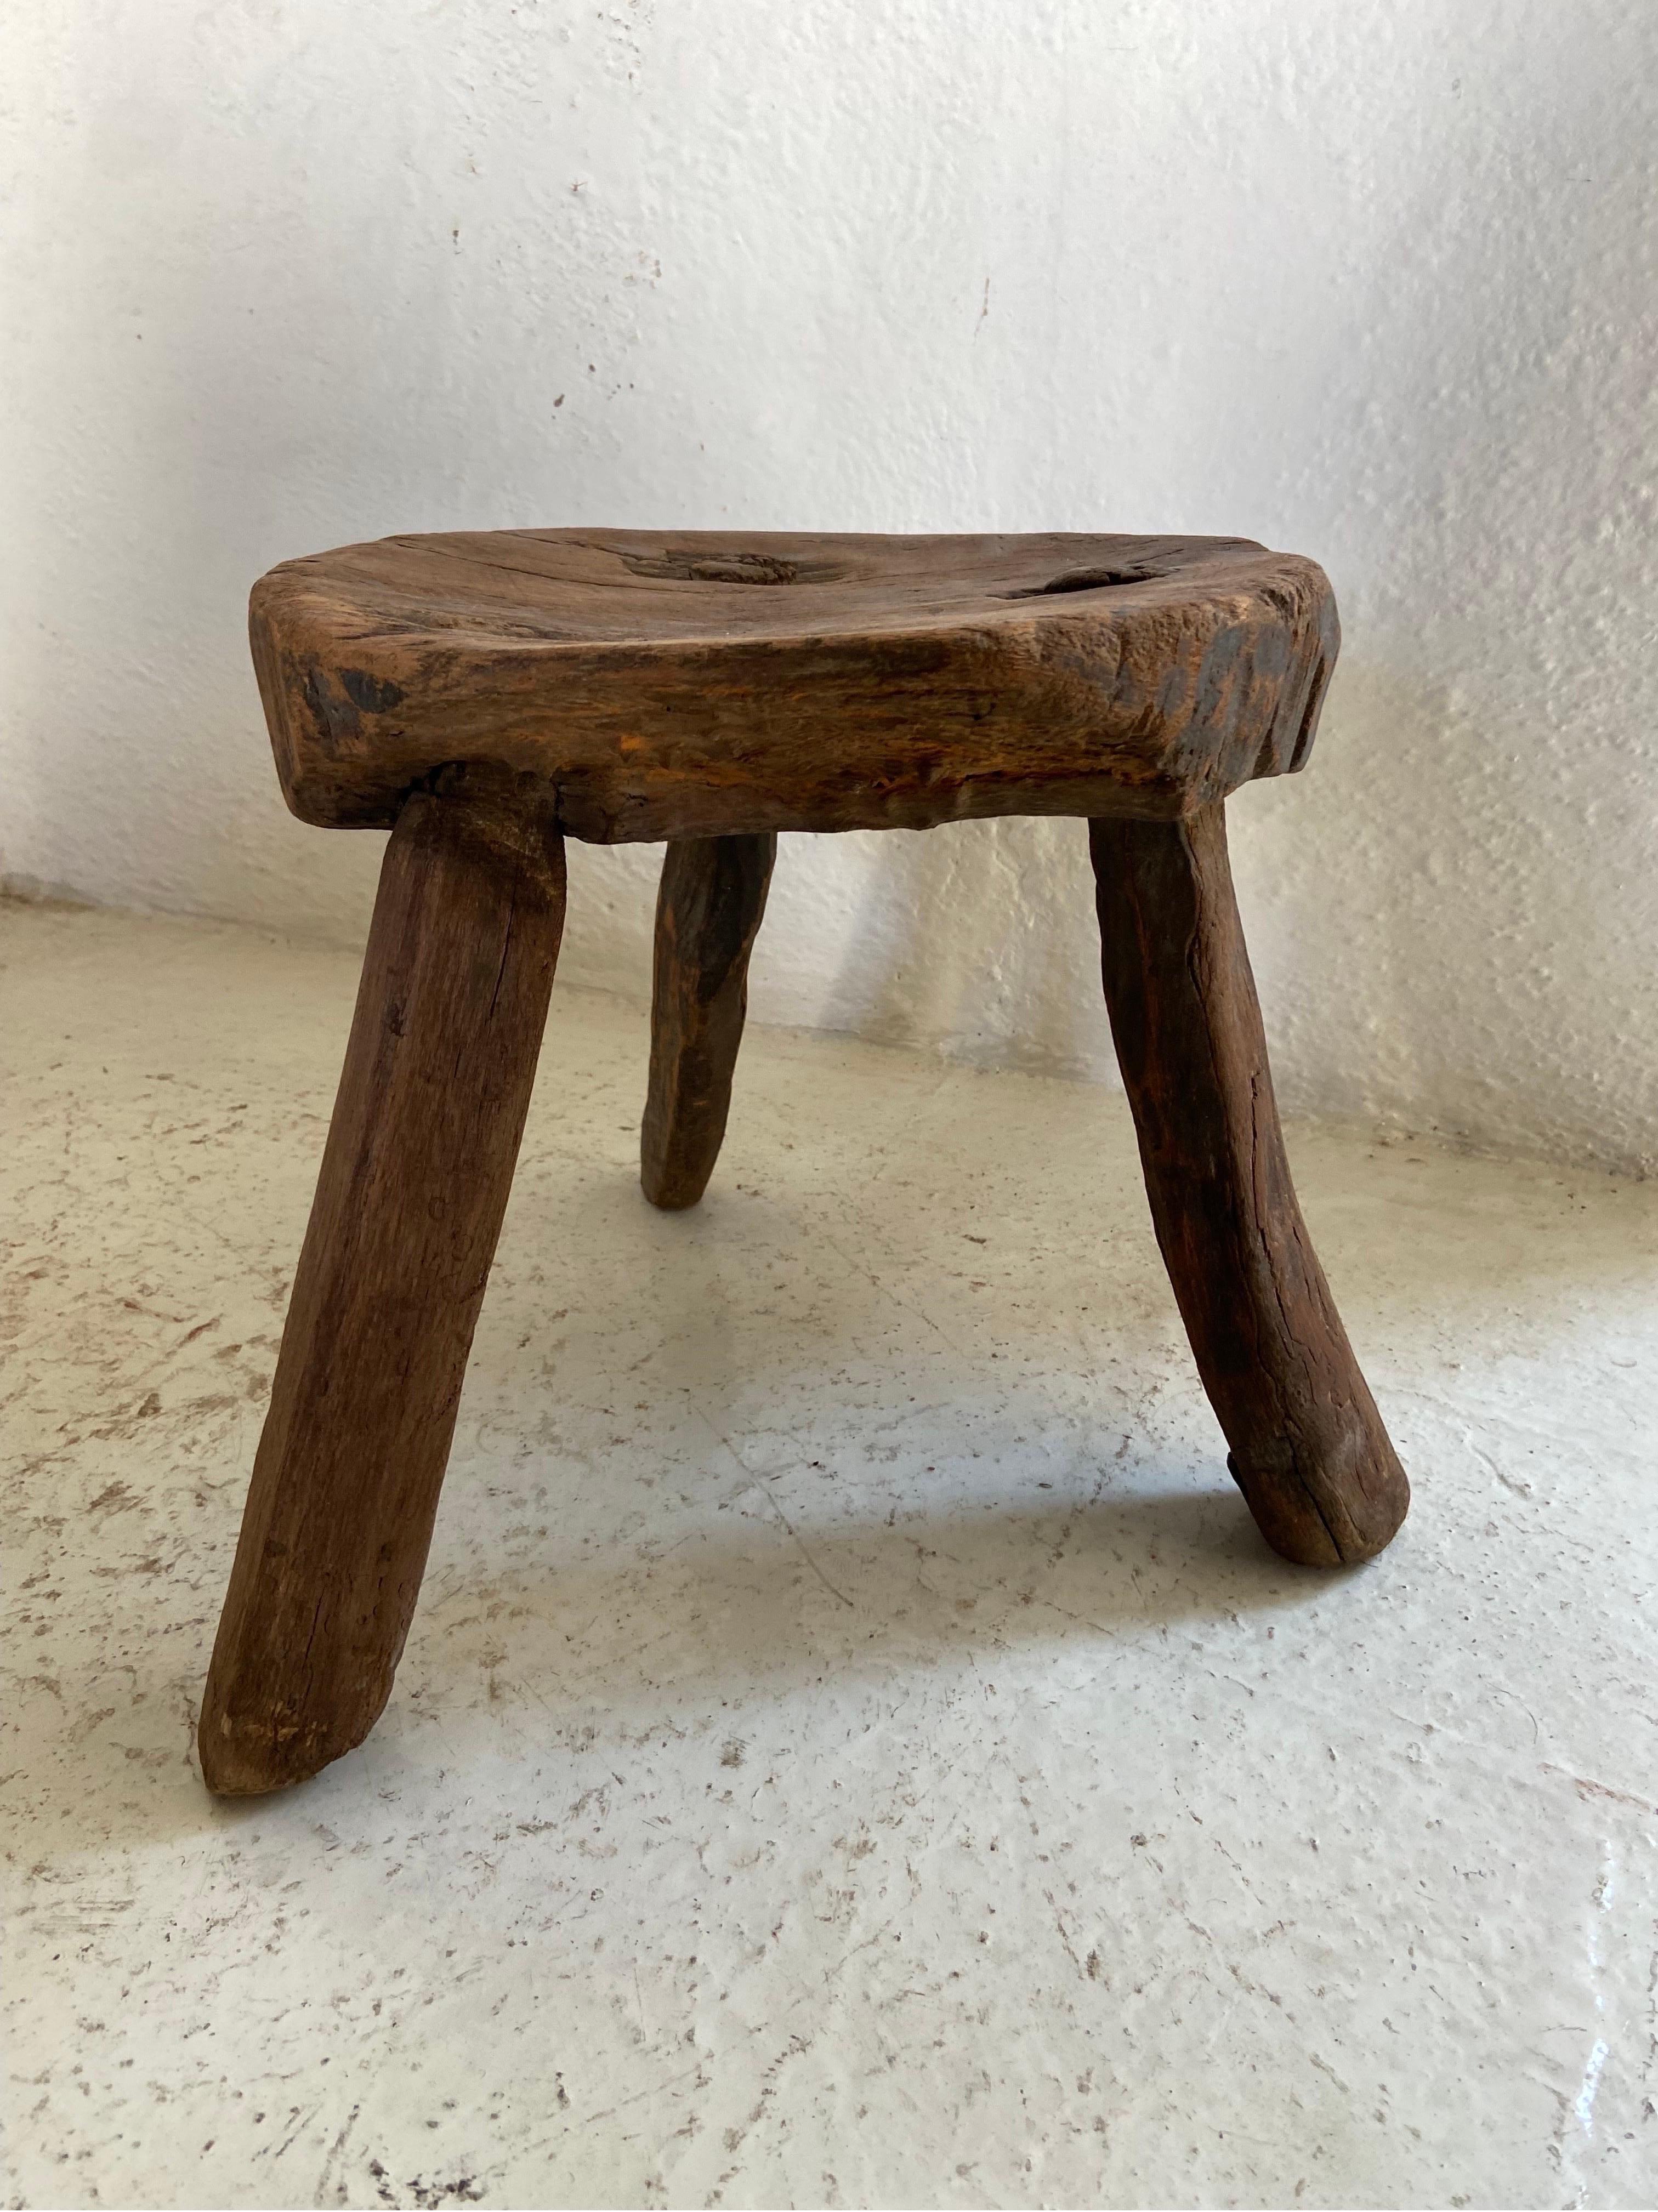 Hardwood Mid 20th Century Stool From Mexico For Sale